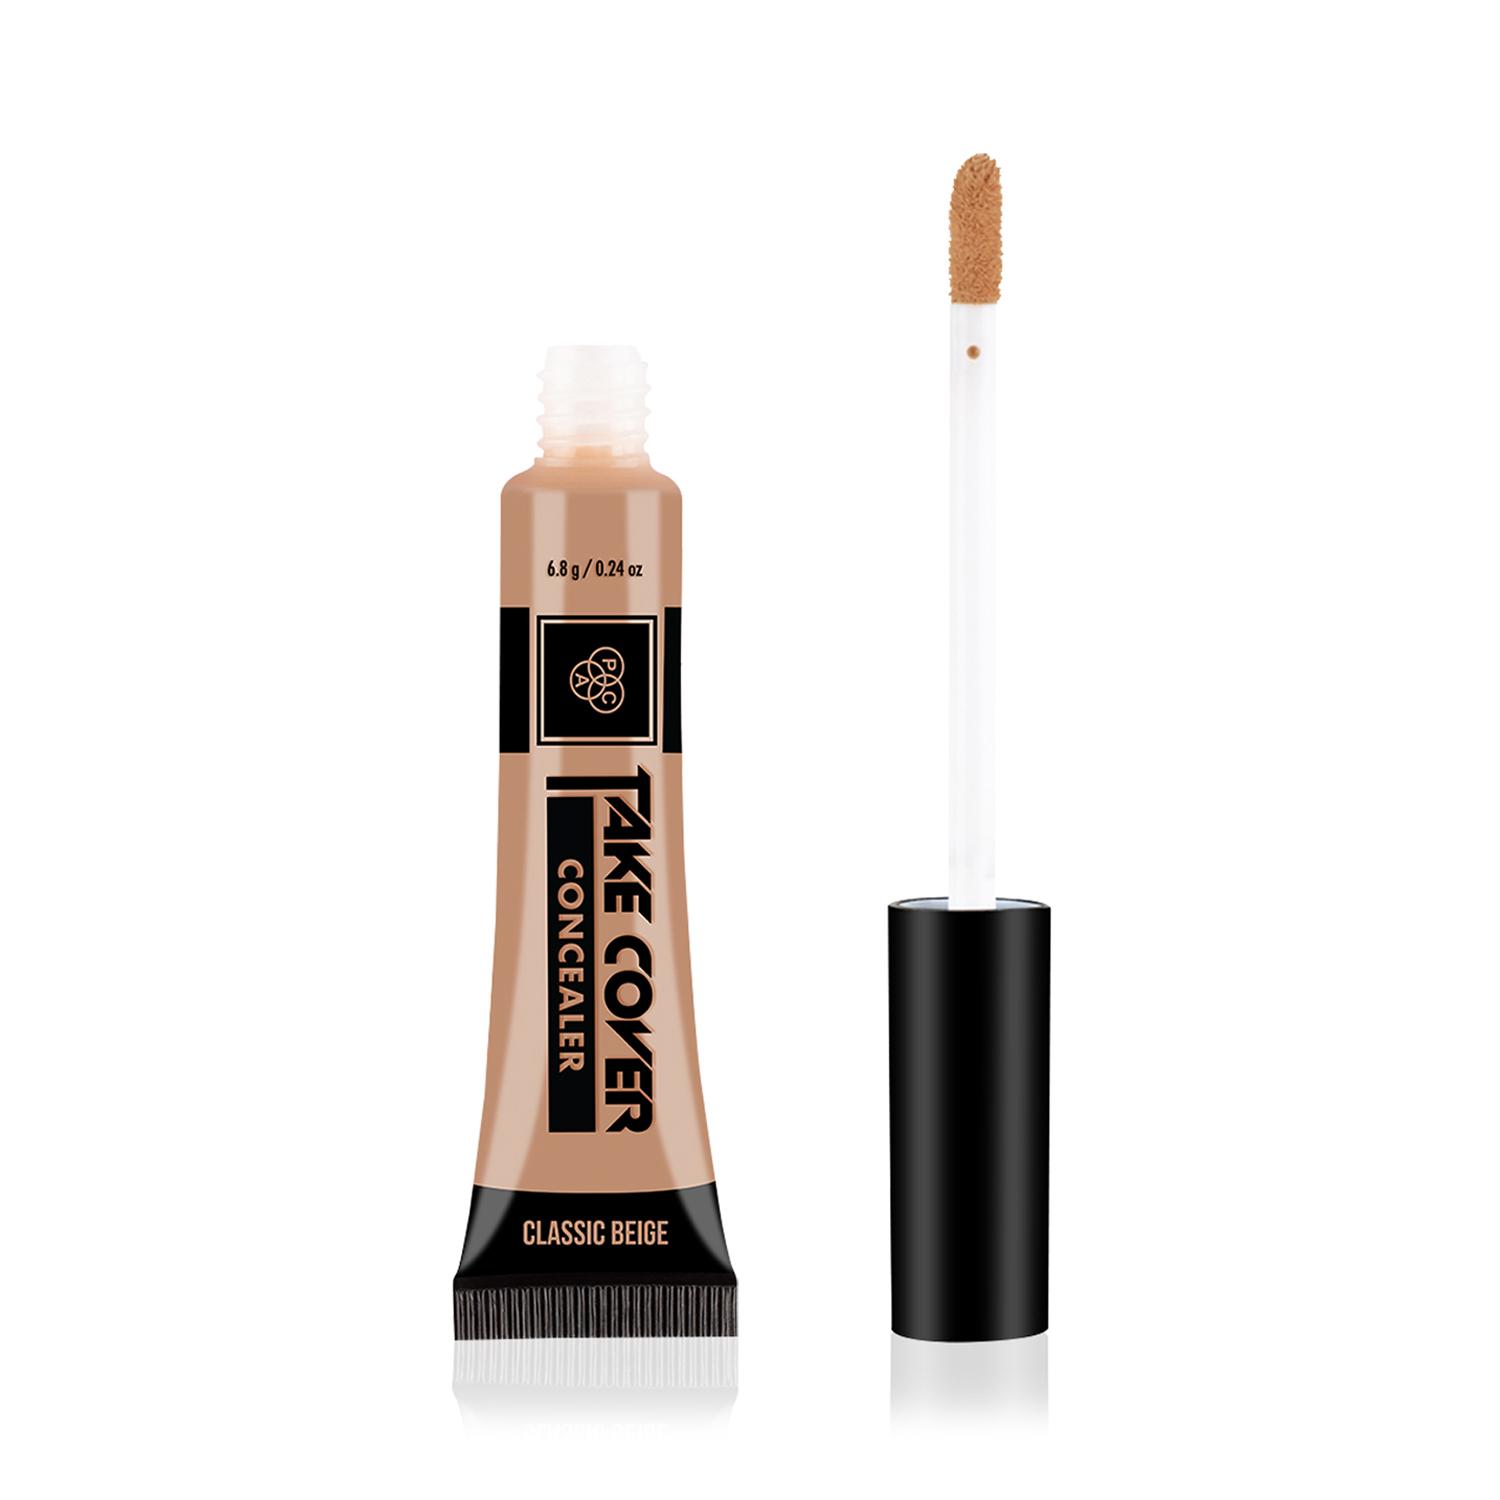 PAC | PAC Take Cover Concealer - 09 Classic Beige (6.8g)